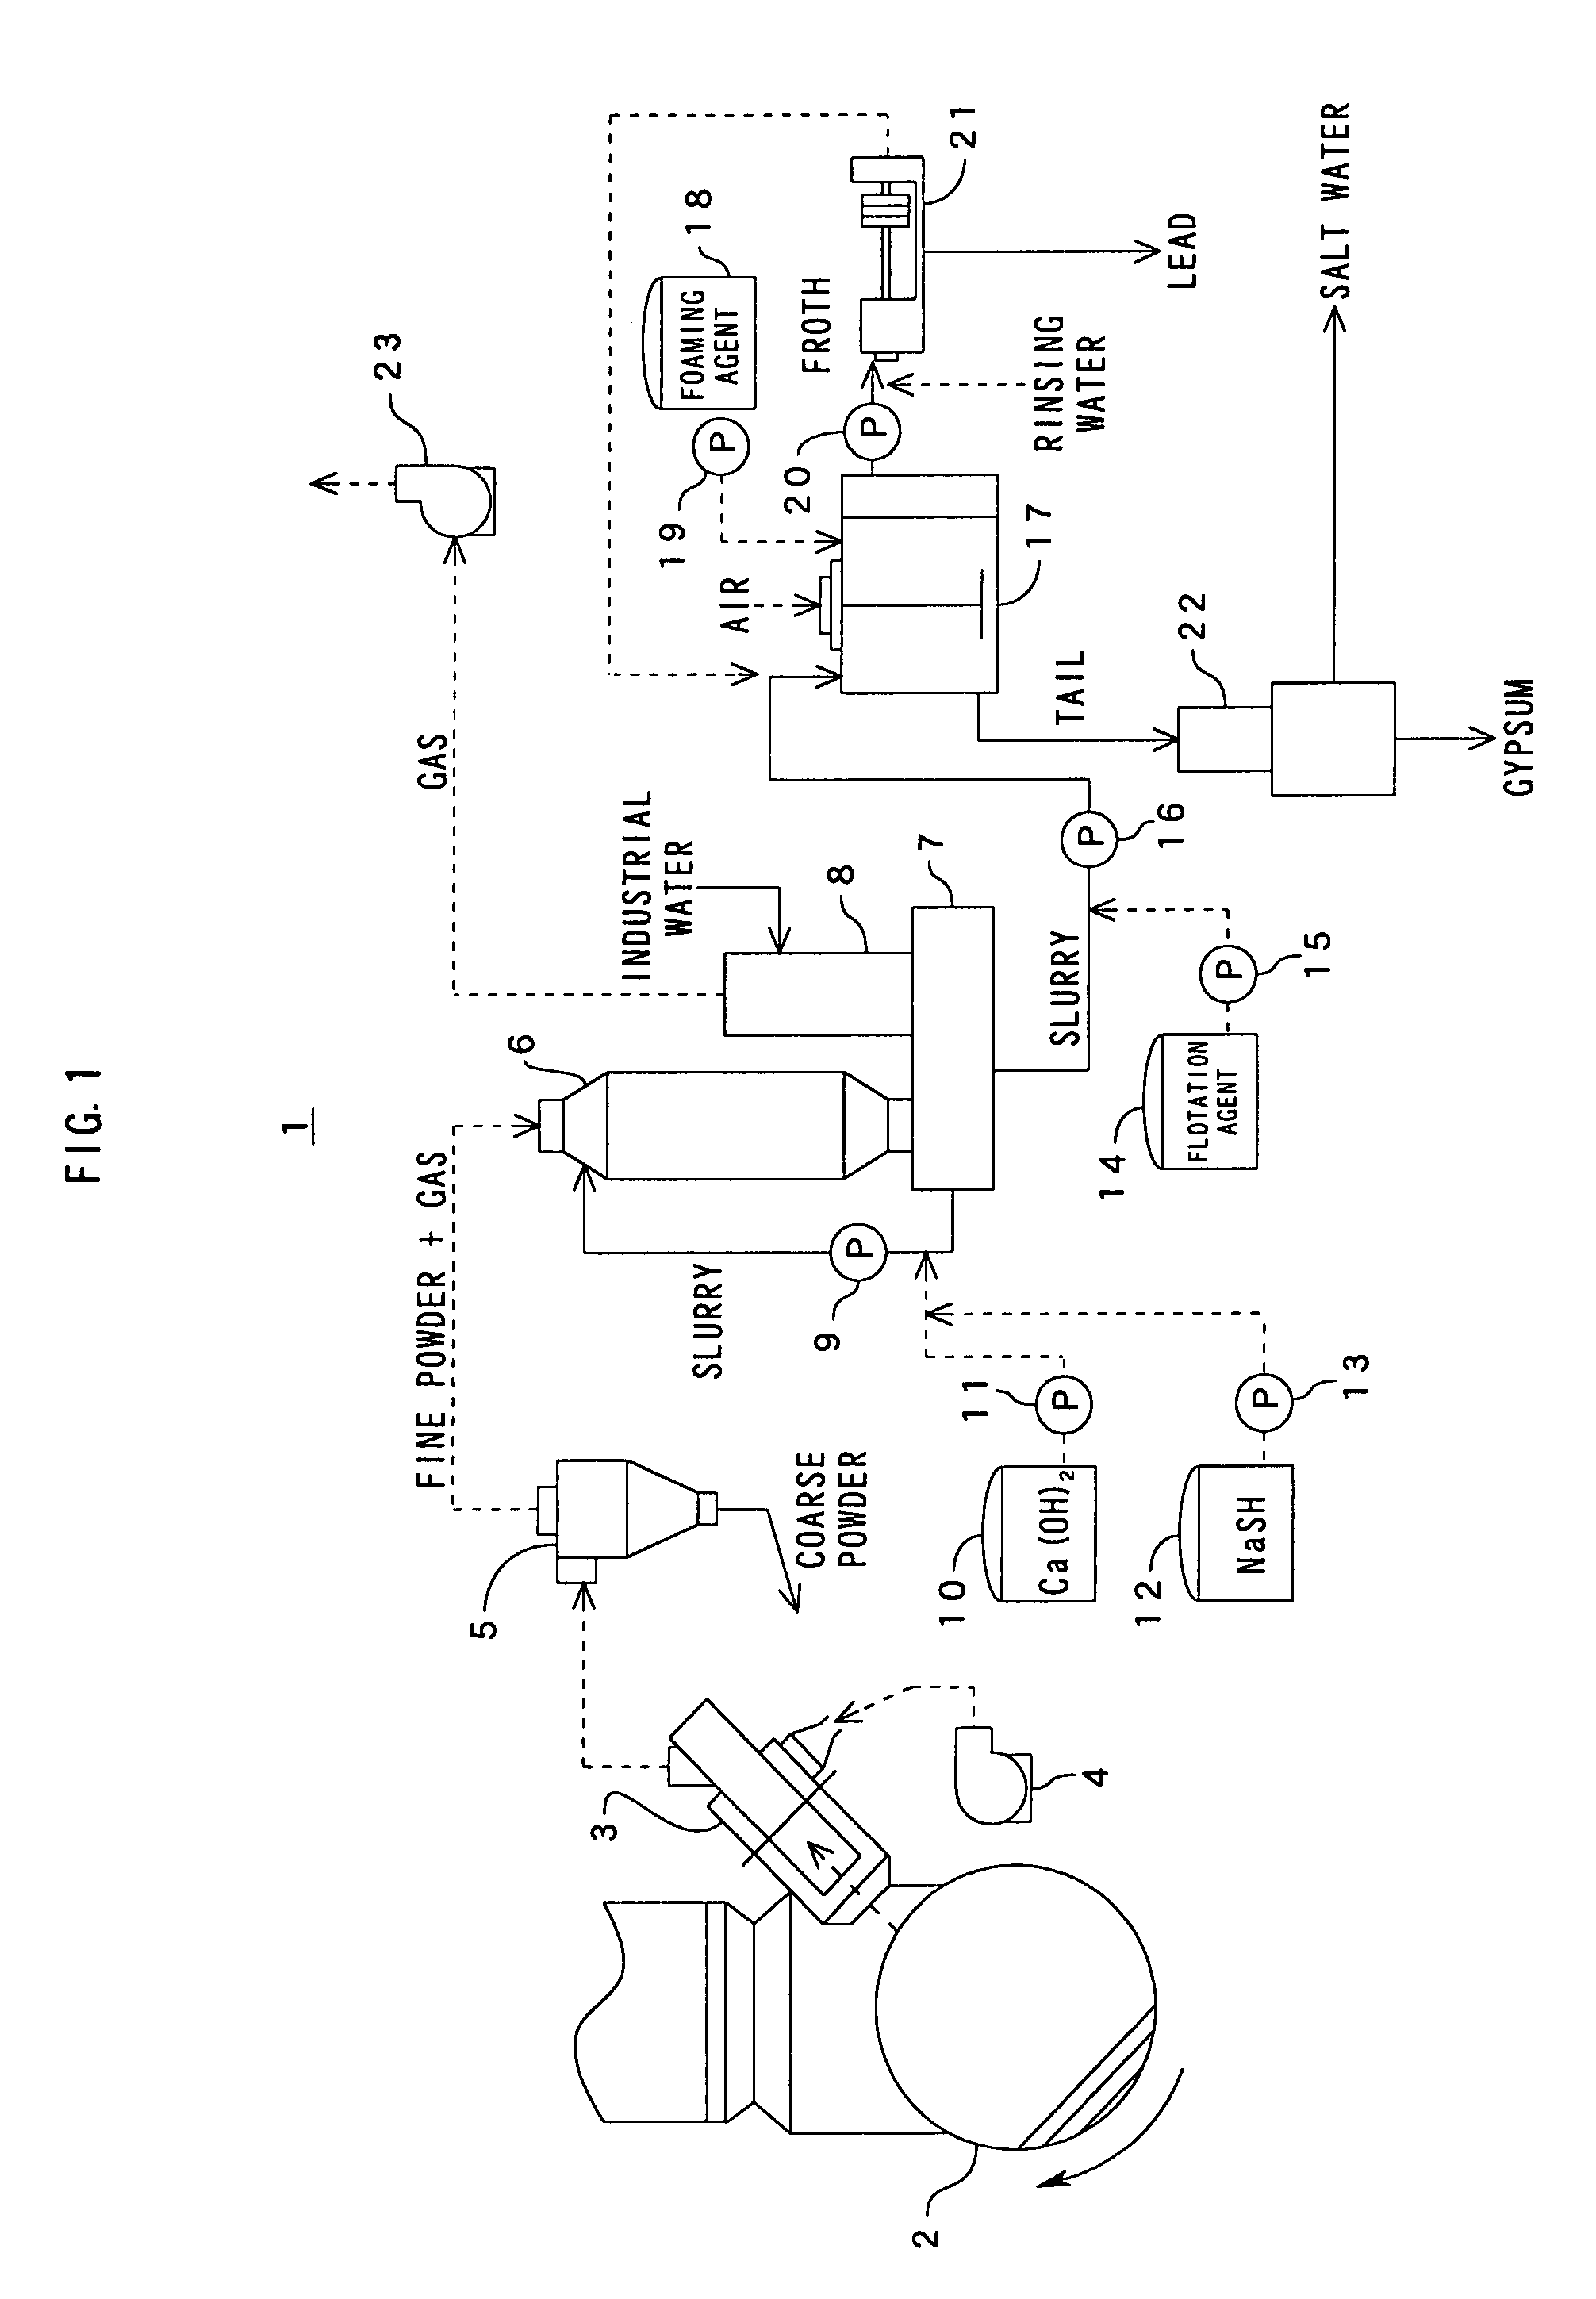 System and method for treating dust contained in extracted cement kiln combustion gas